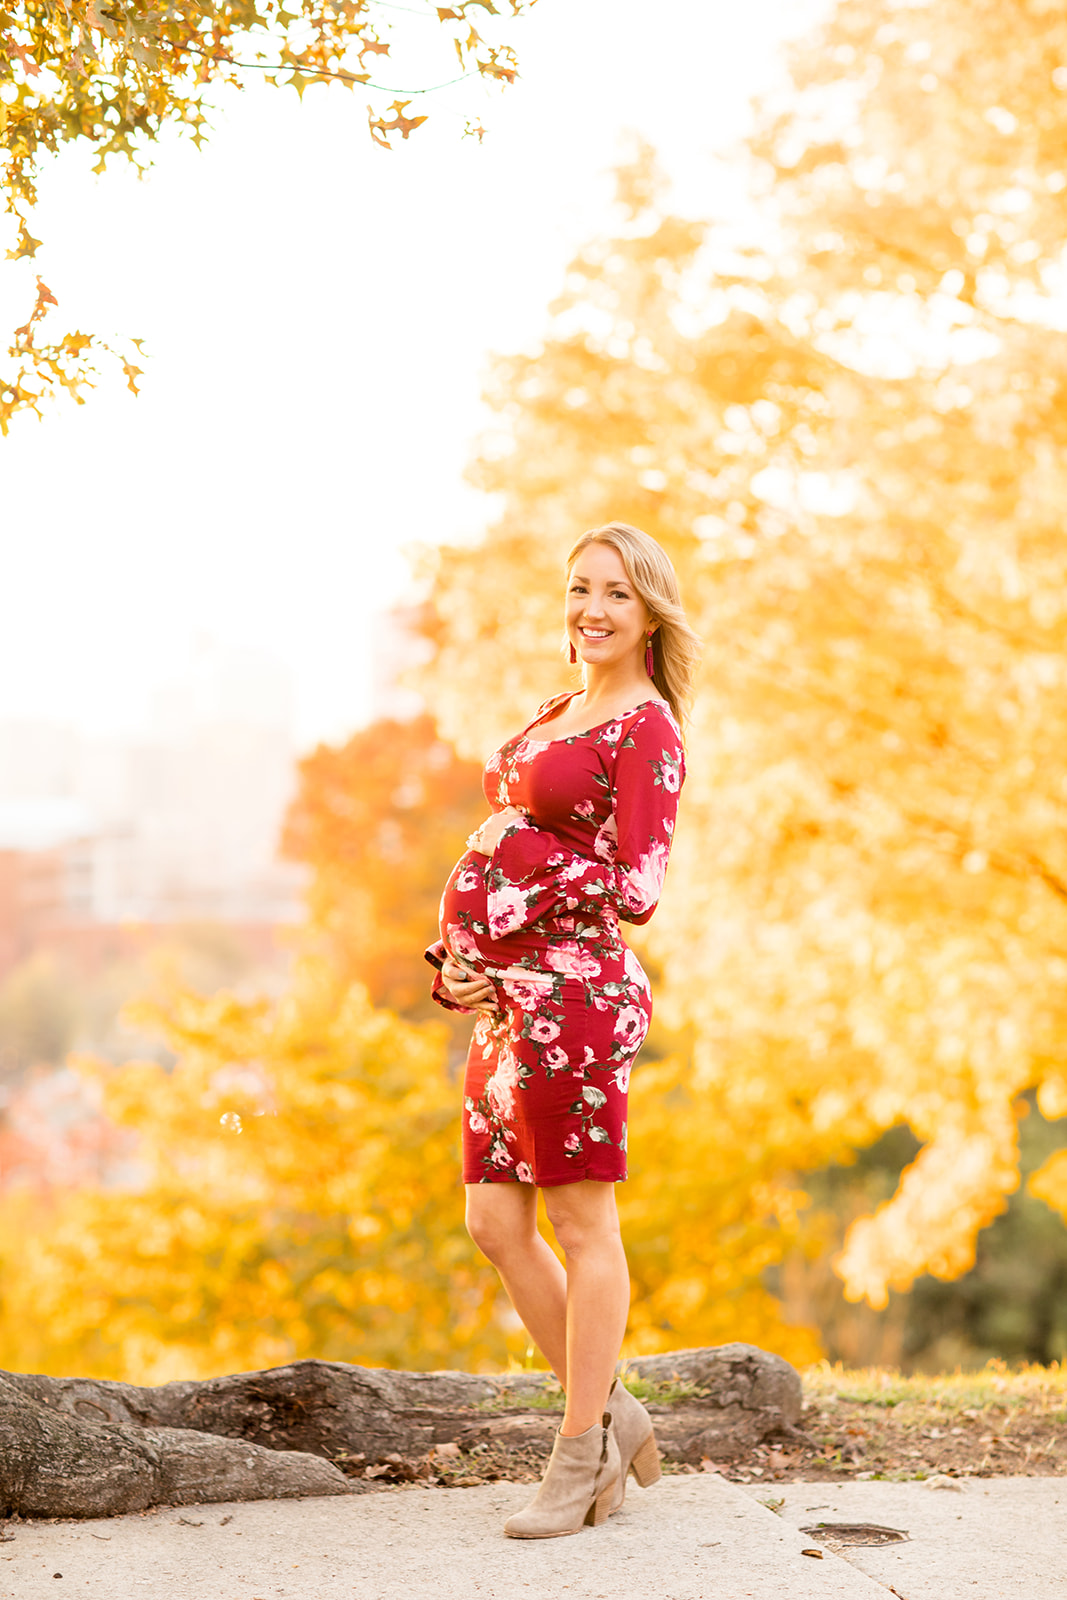 Erika  Stephens Golden Hour Maternity Photos at Libby Hill - Image Property of www.j-dphoto.com